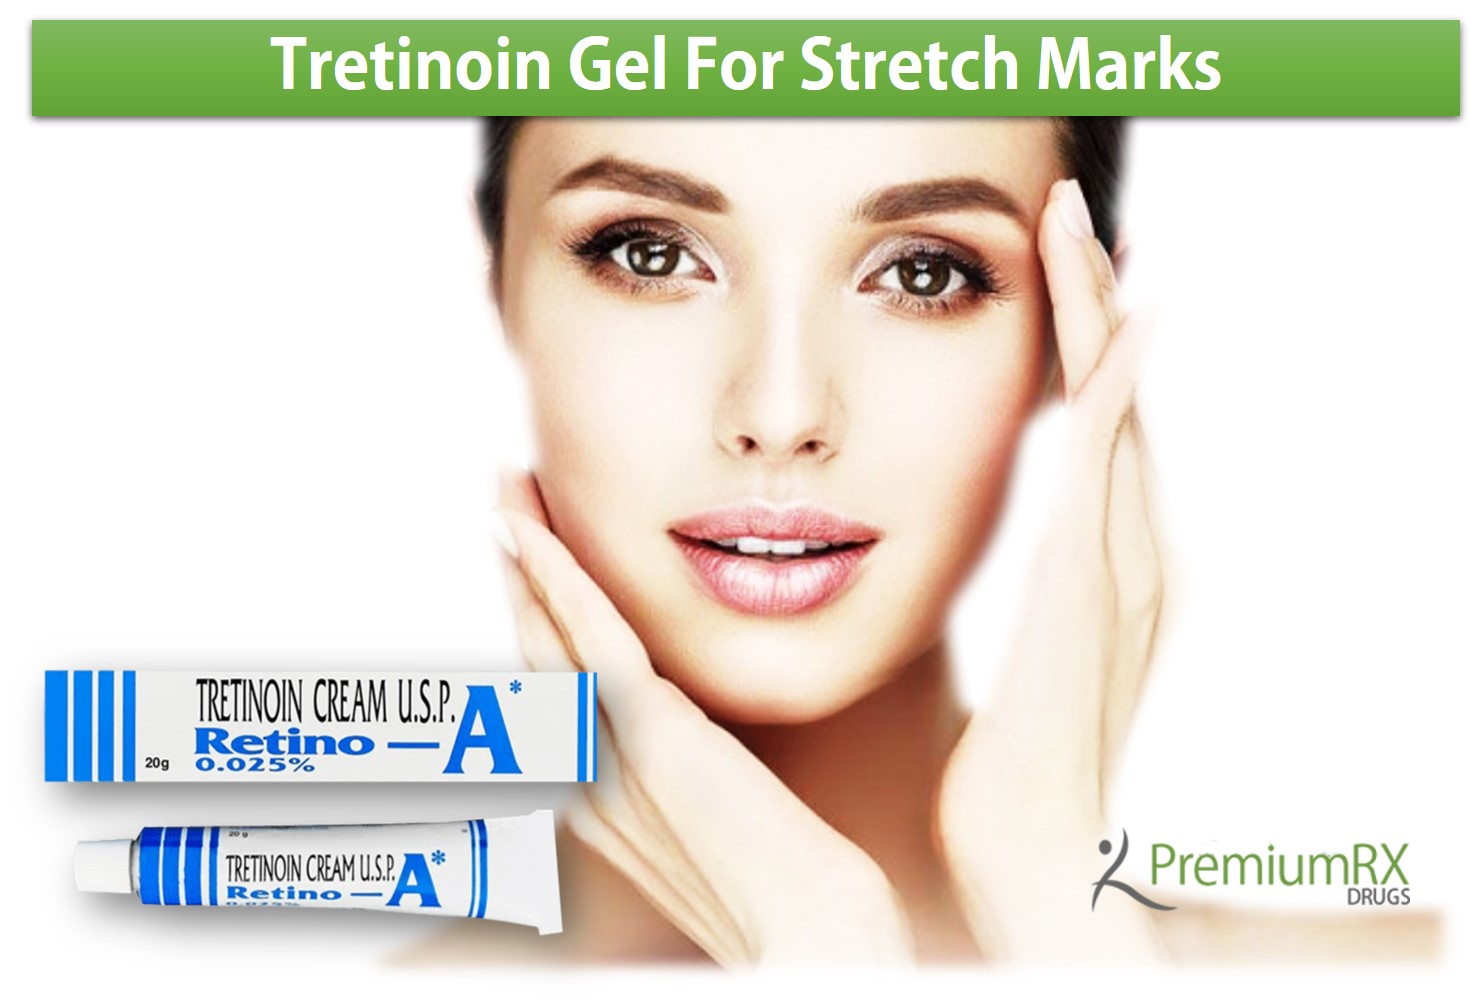 Tretinoin Gel For Stretch Marks